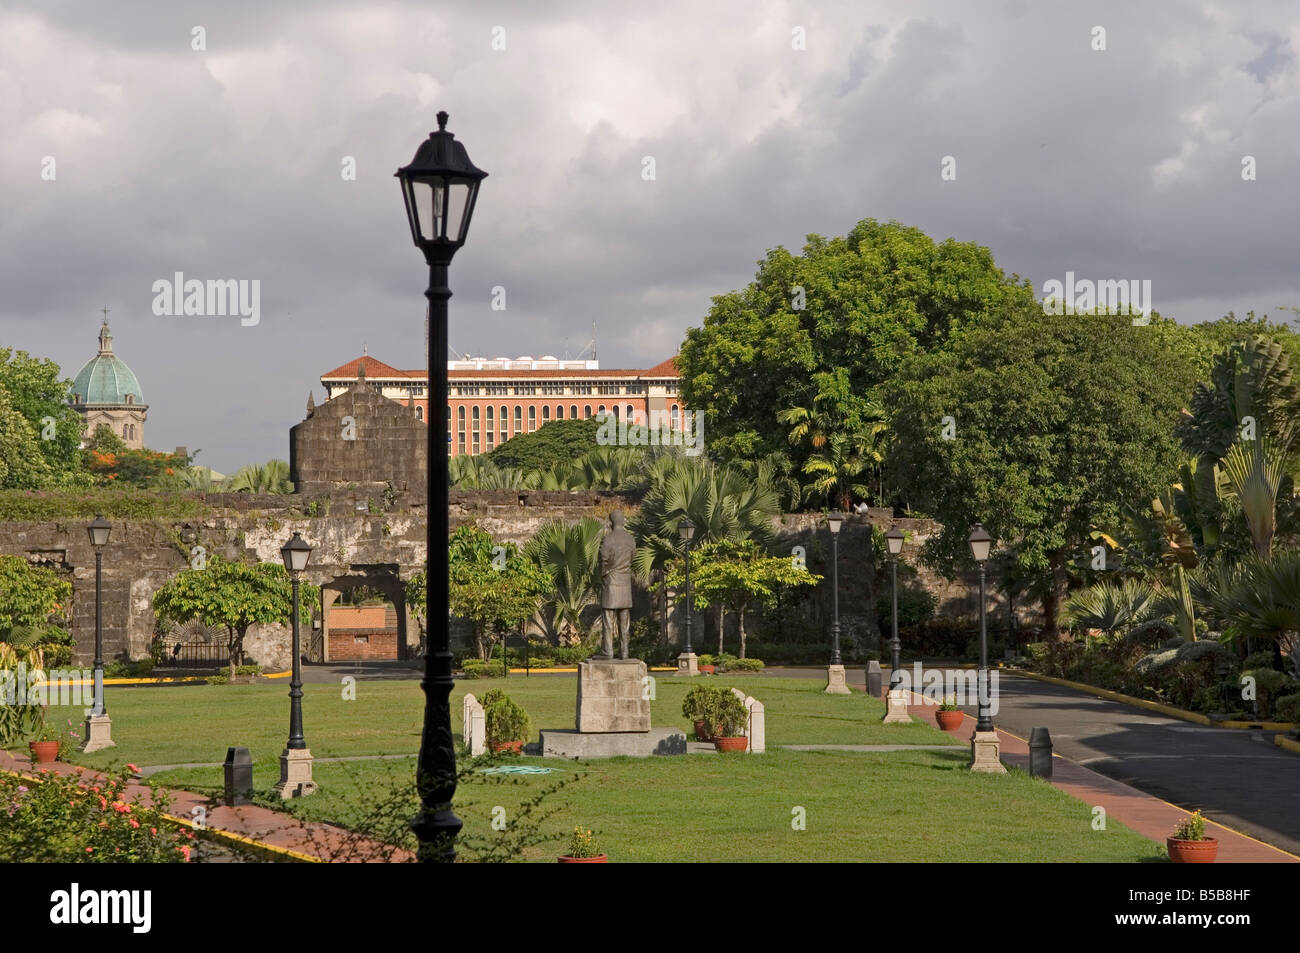 Intamuros city, overview from the Fort Santiago, Manila, The Philippines, Southeast Asia Stock Photo